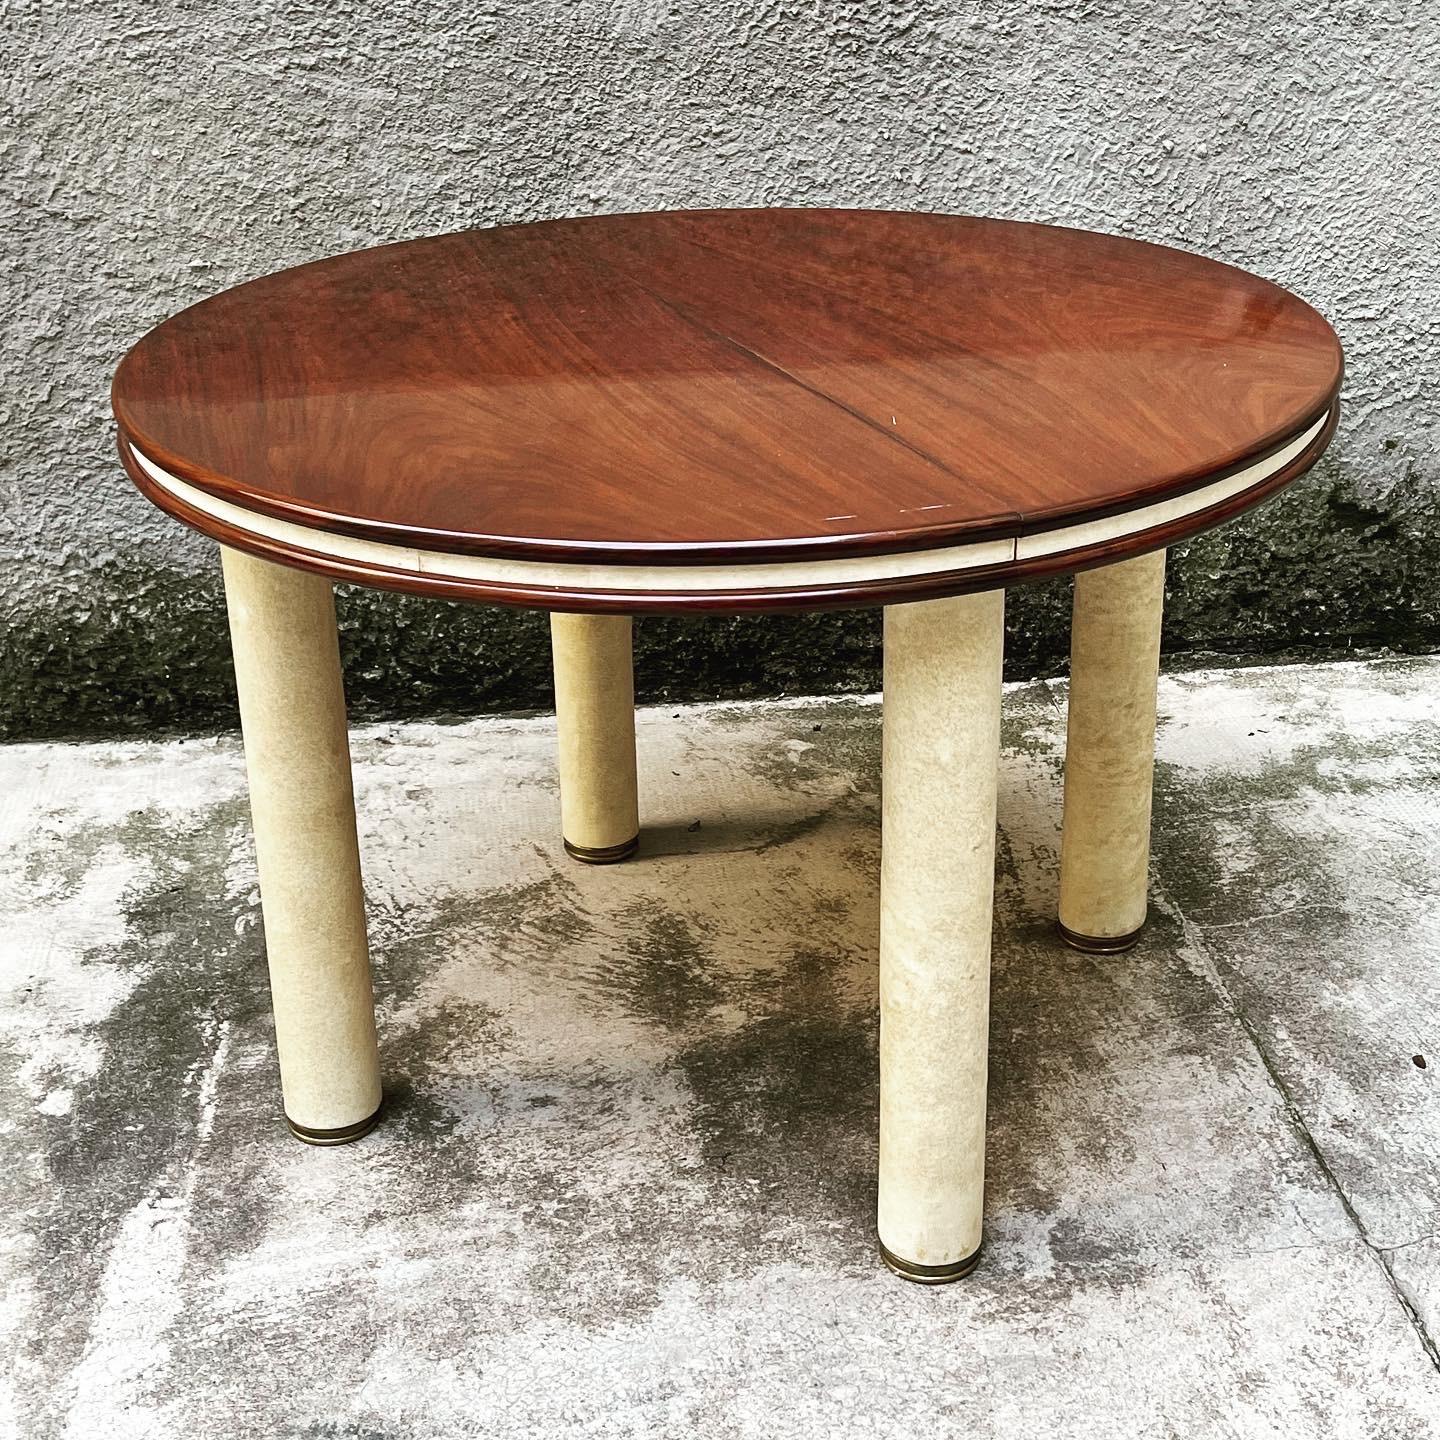 This visually striking, elegant and functional Italian table has the ability to extend to become oval (no extension). Made circa 1960s. Its two main contrasting materials only teak and light vellum. The four sturdy covered legs end in 4 large brass